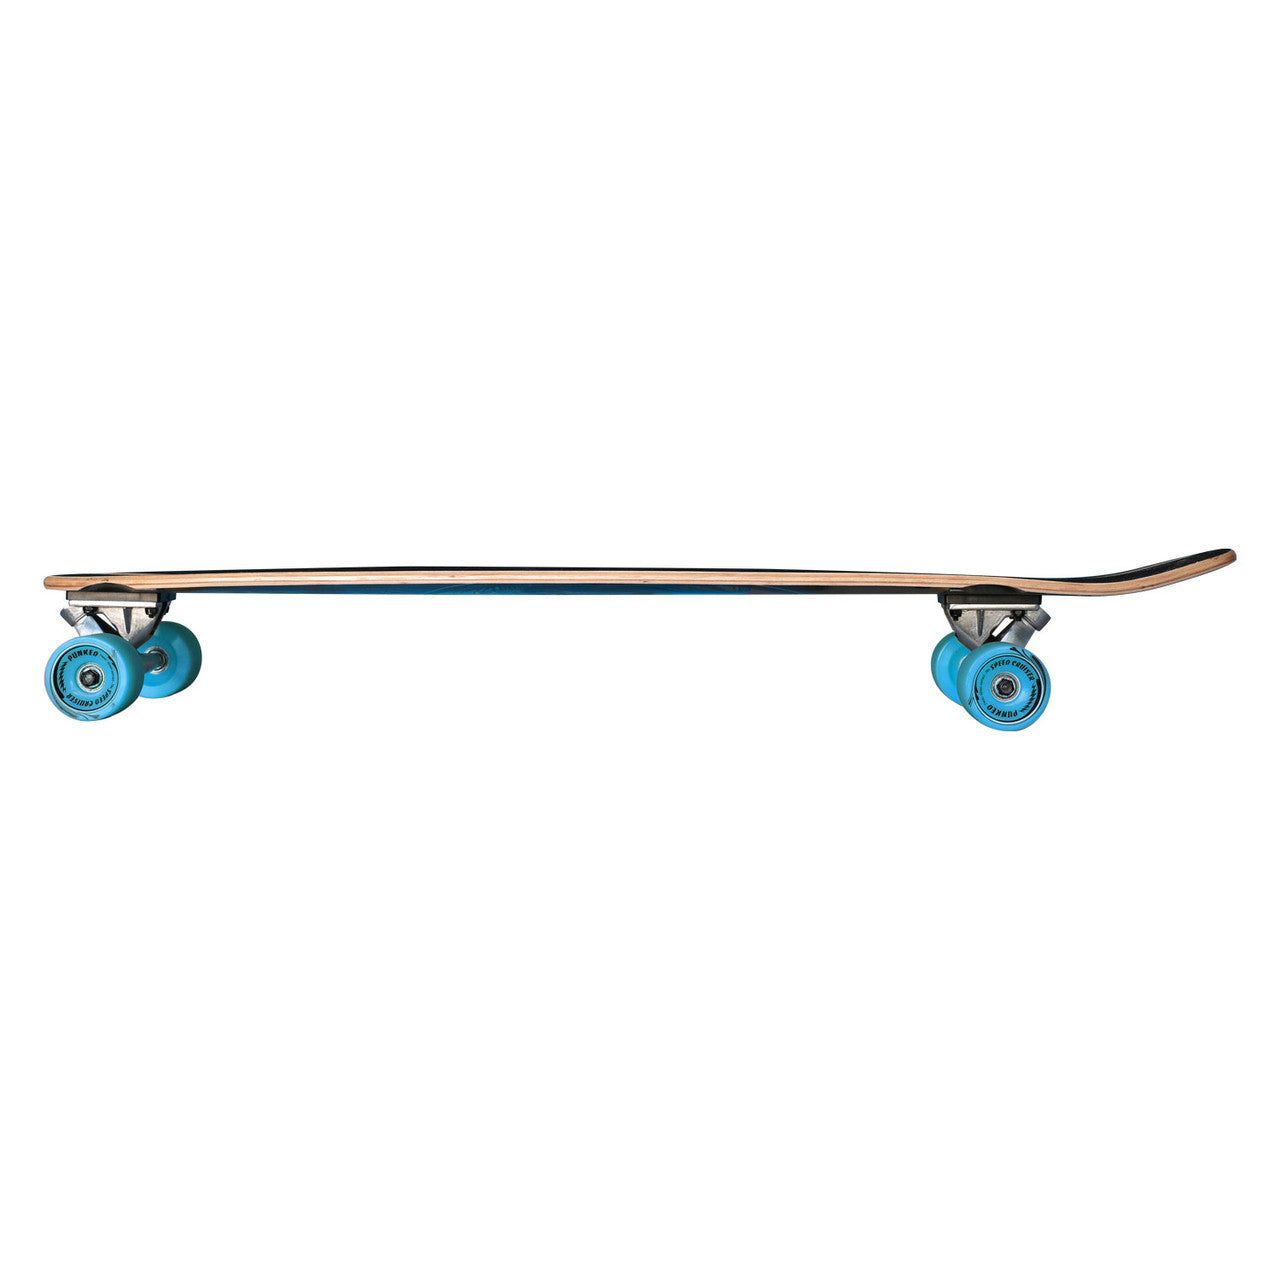 Yocaher Kicktail Longboard Complete - VW Bettle Series - Yellow